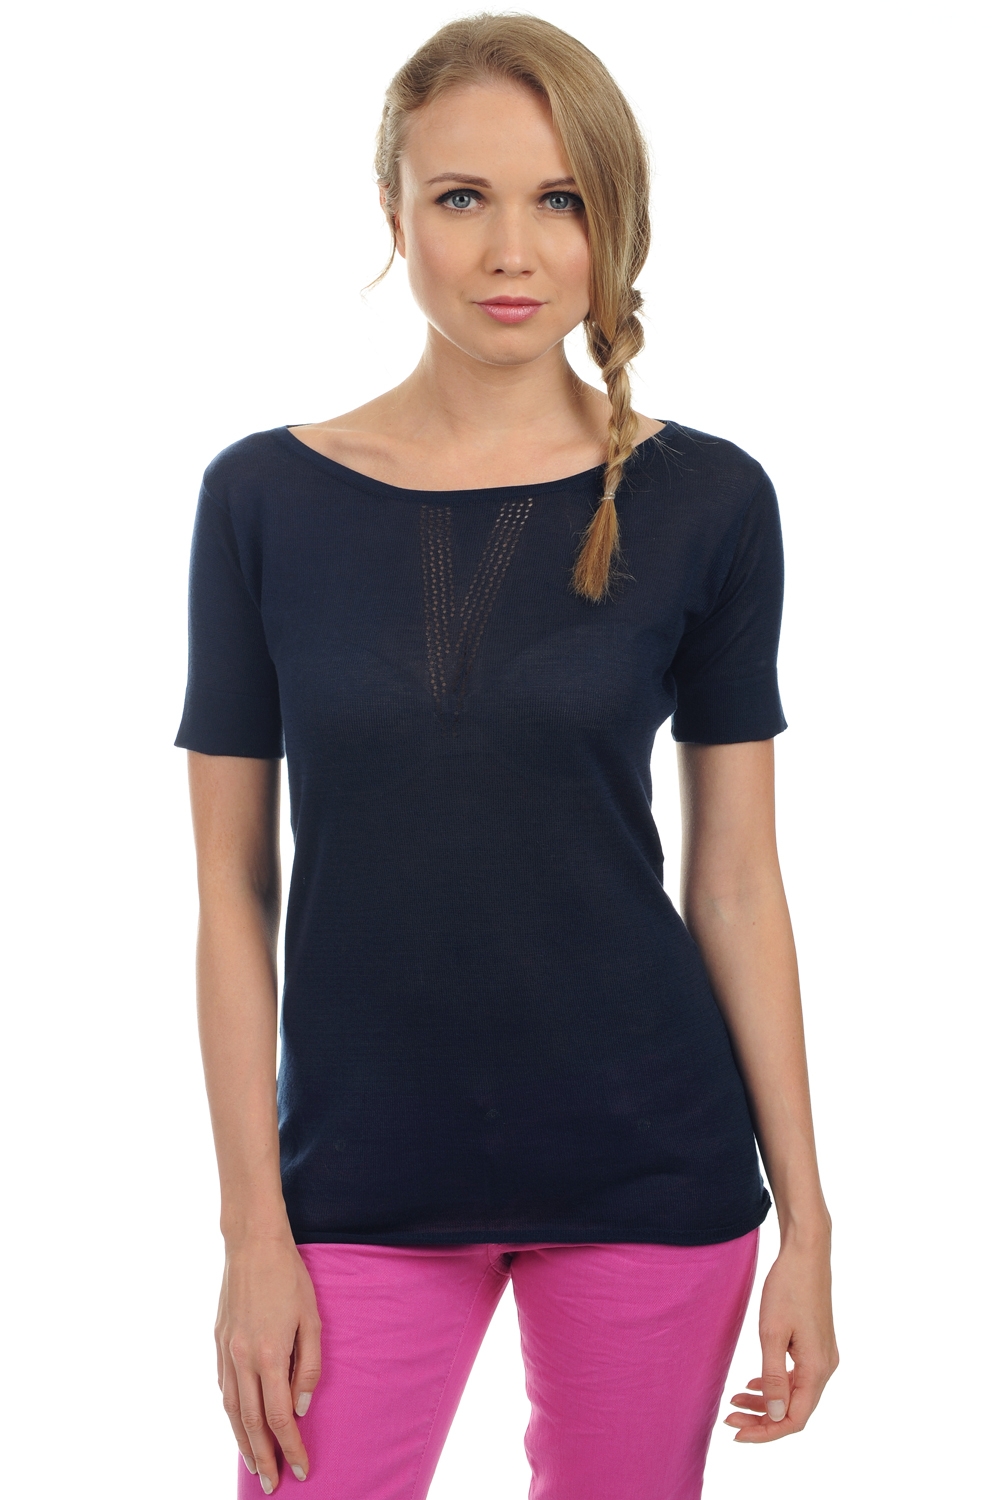 Cotton Giza 45 ladies spring summer collection whitney navy 3xl